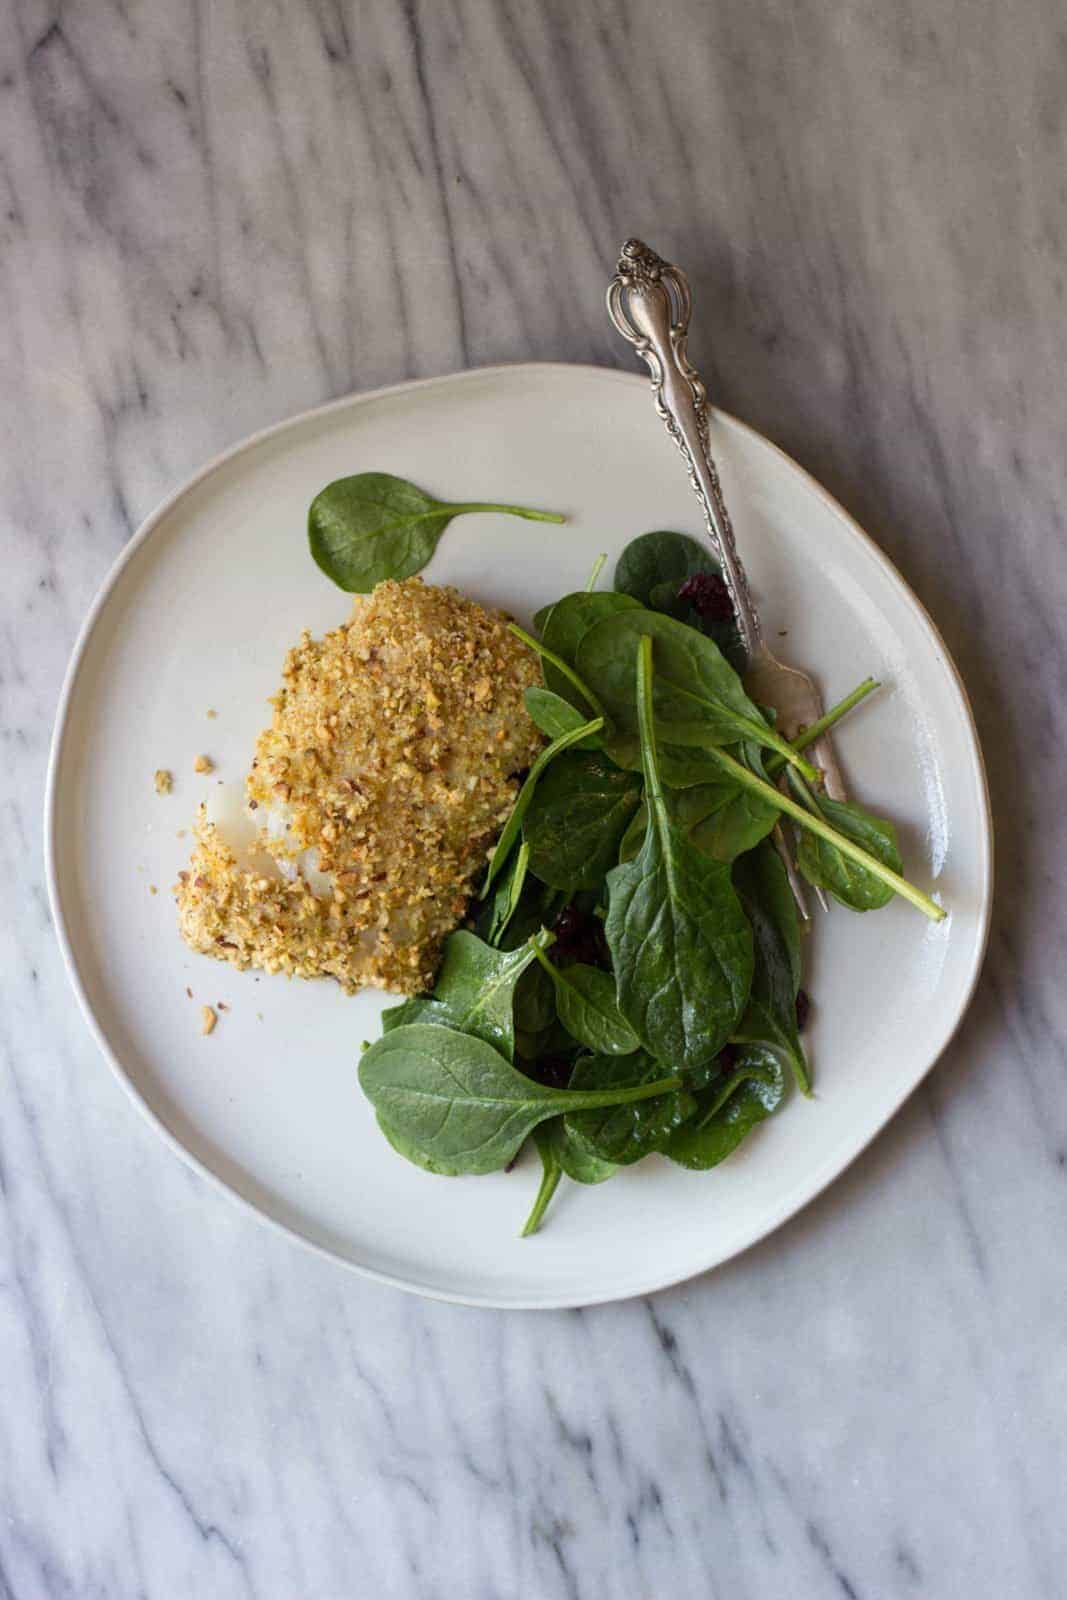 Pistachio-crusted cod sitting on a bed of spinach.